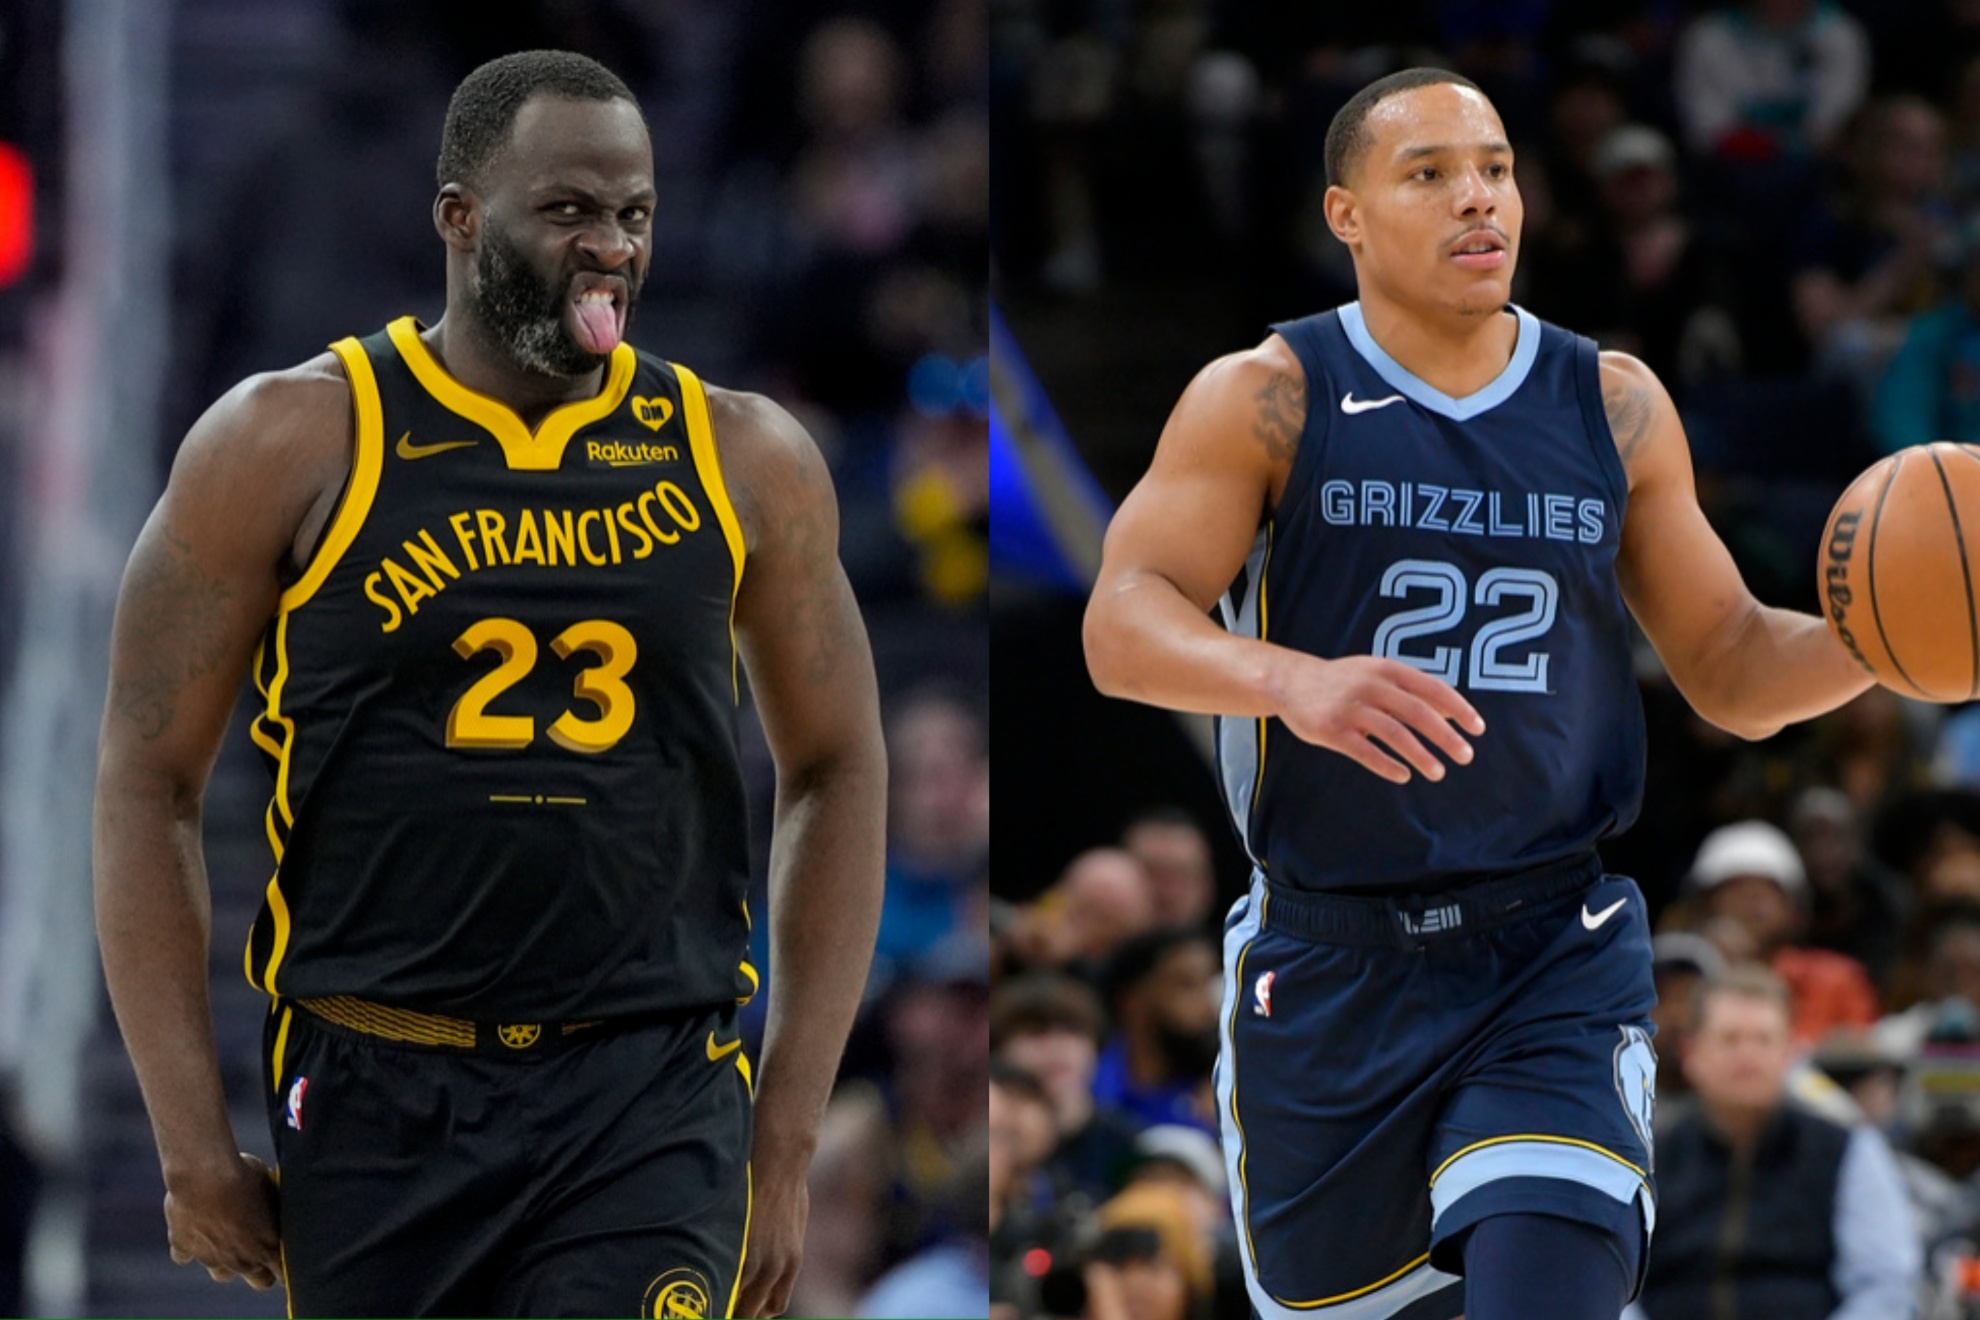 Draymond Green (R) and Desmond Bane came to blows in the Warriors-Grizzlies.